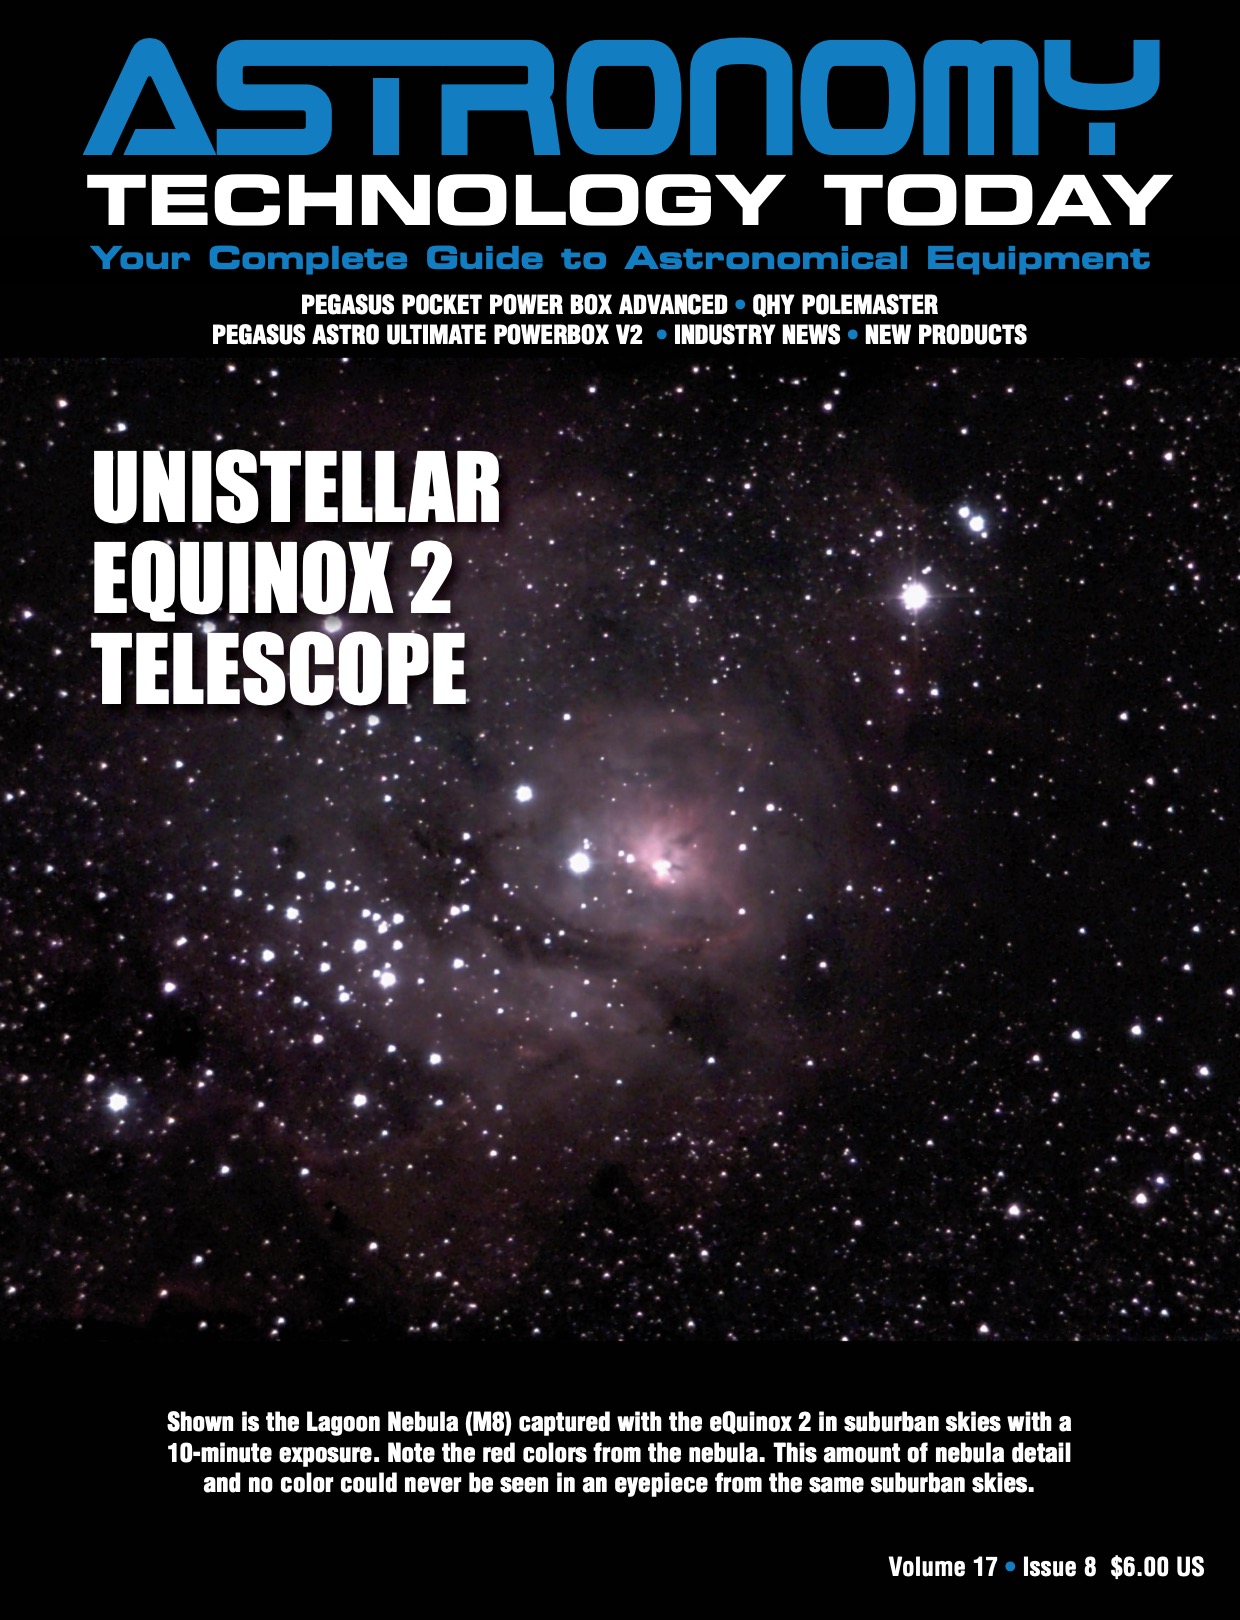 Astronomy Technology Today - Volume 17 Issue 8